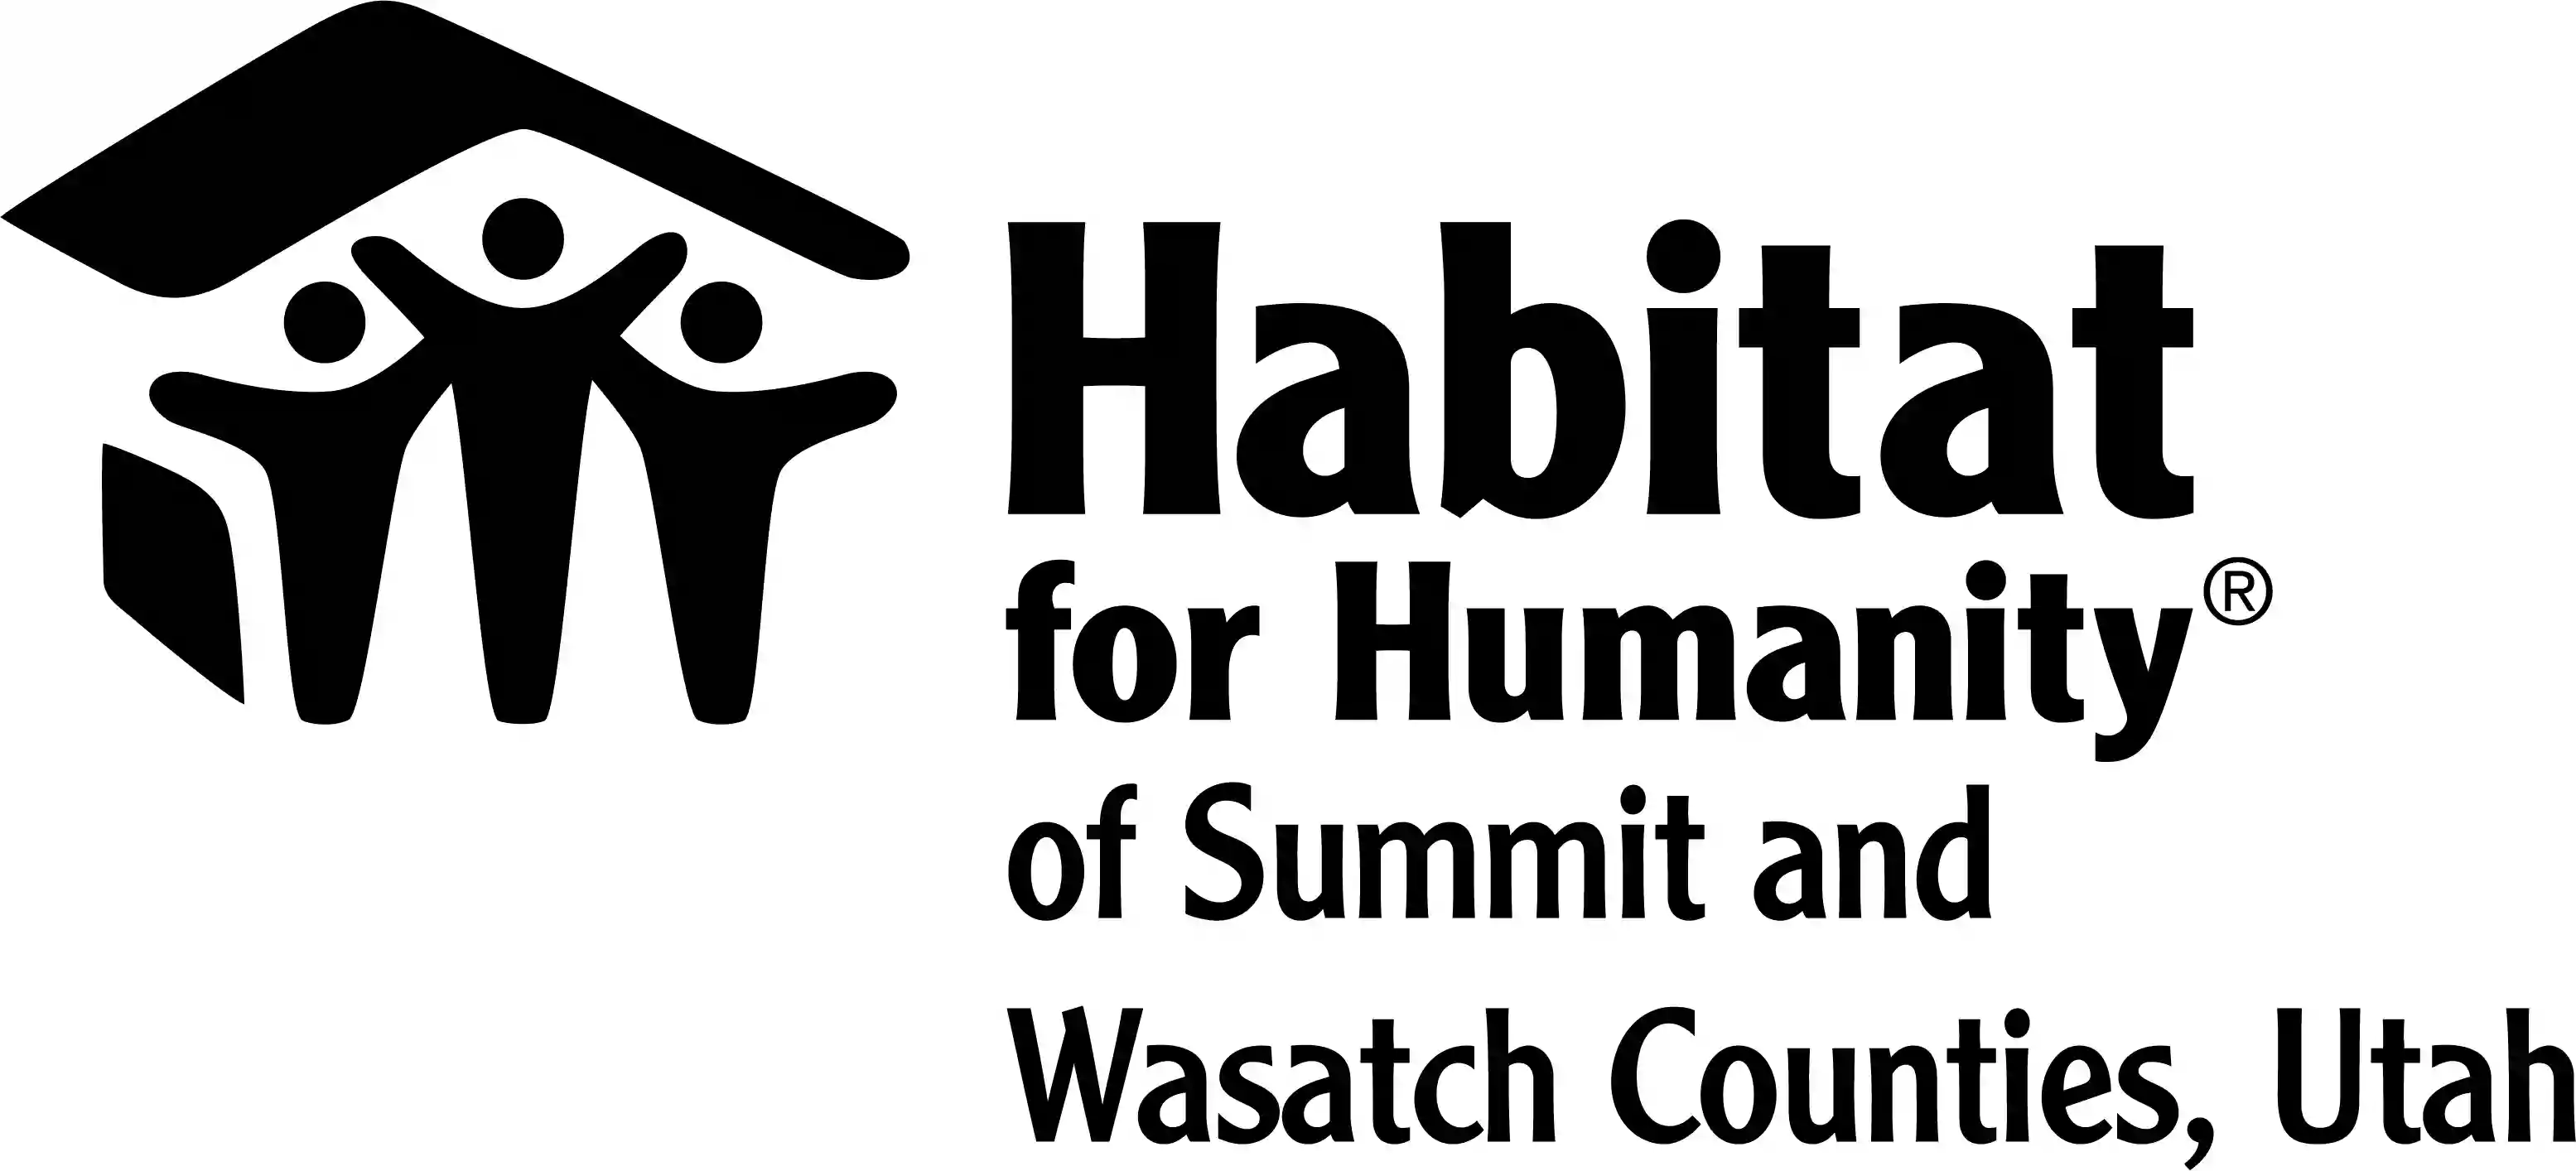 Park City ReStore & Habitat For Humanity of Summit & Wasatch County